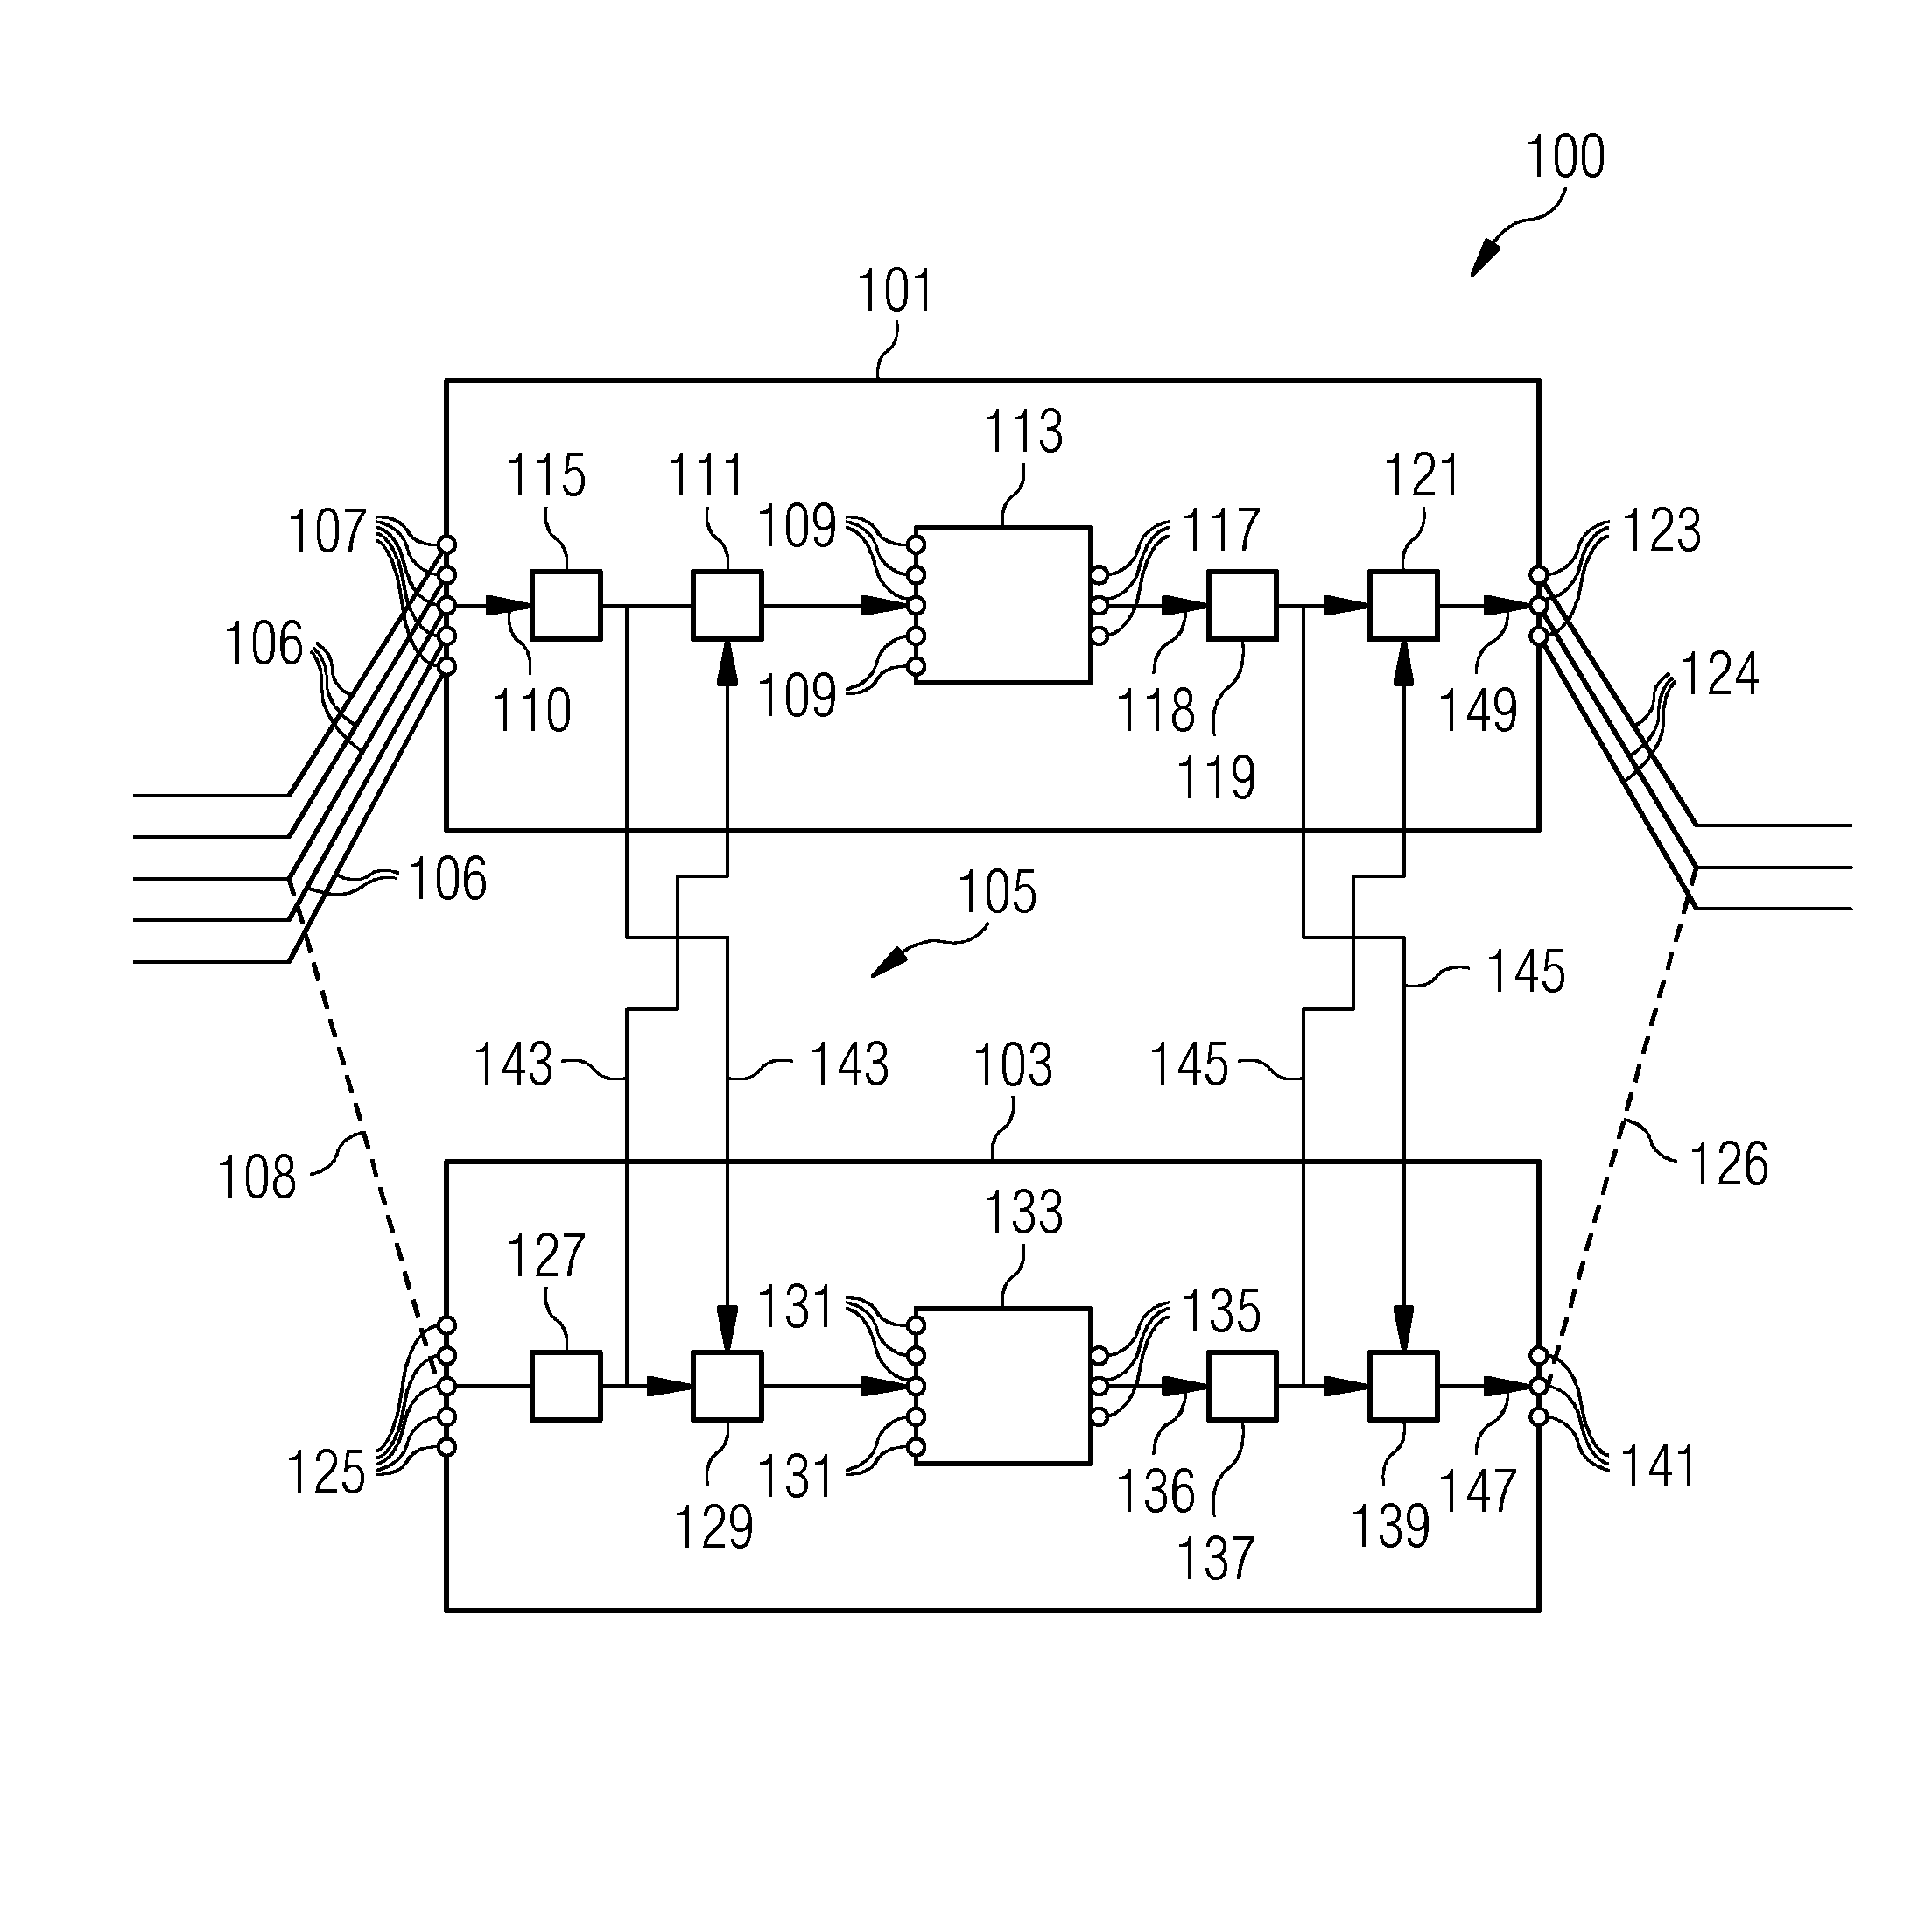 Method and System for Controller Transition